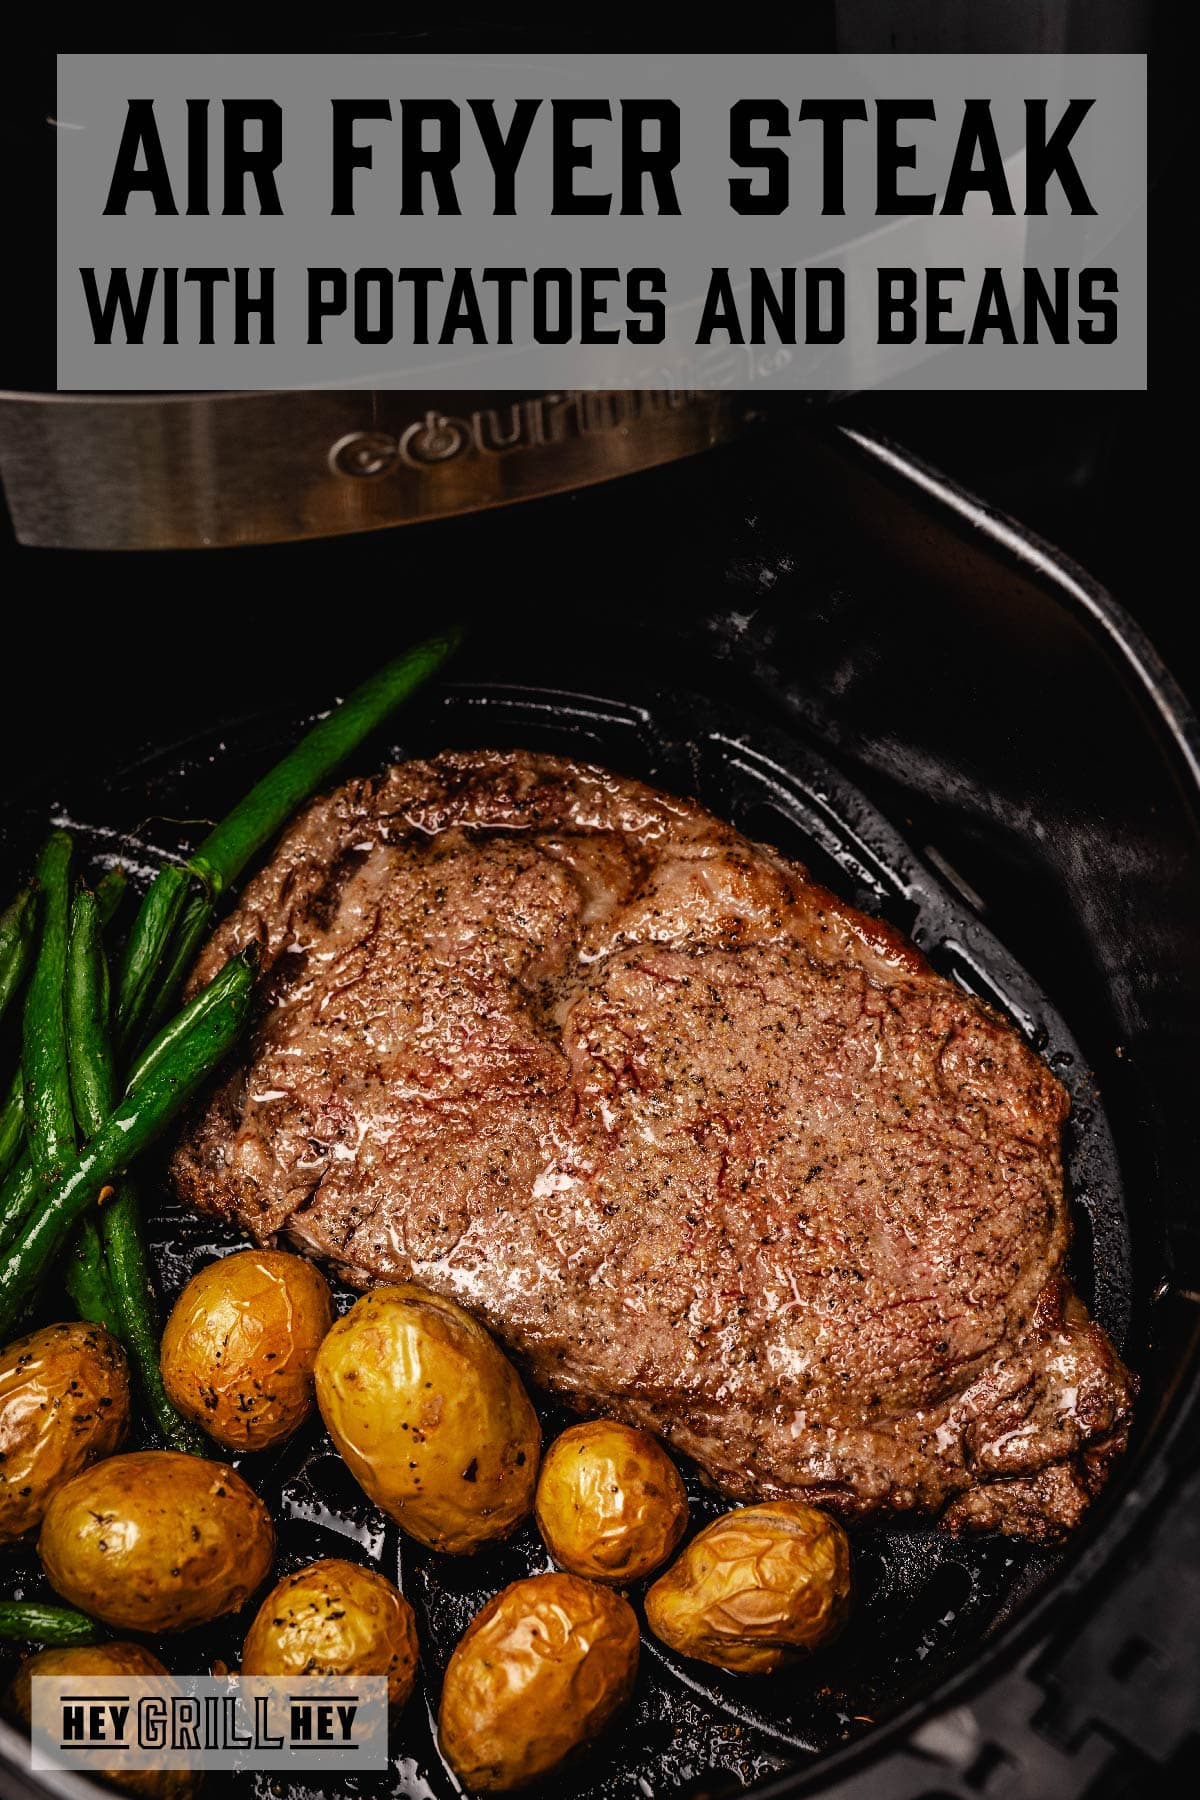 Steak, potatoes, and green beans in air fryer tray. Text reads "Air Fryer Steak with Potatoes and Beans".